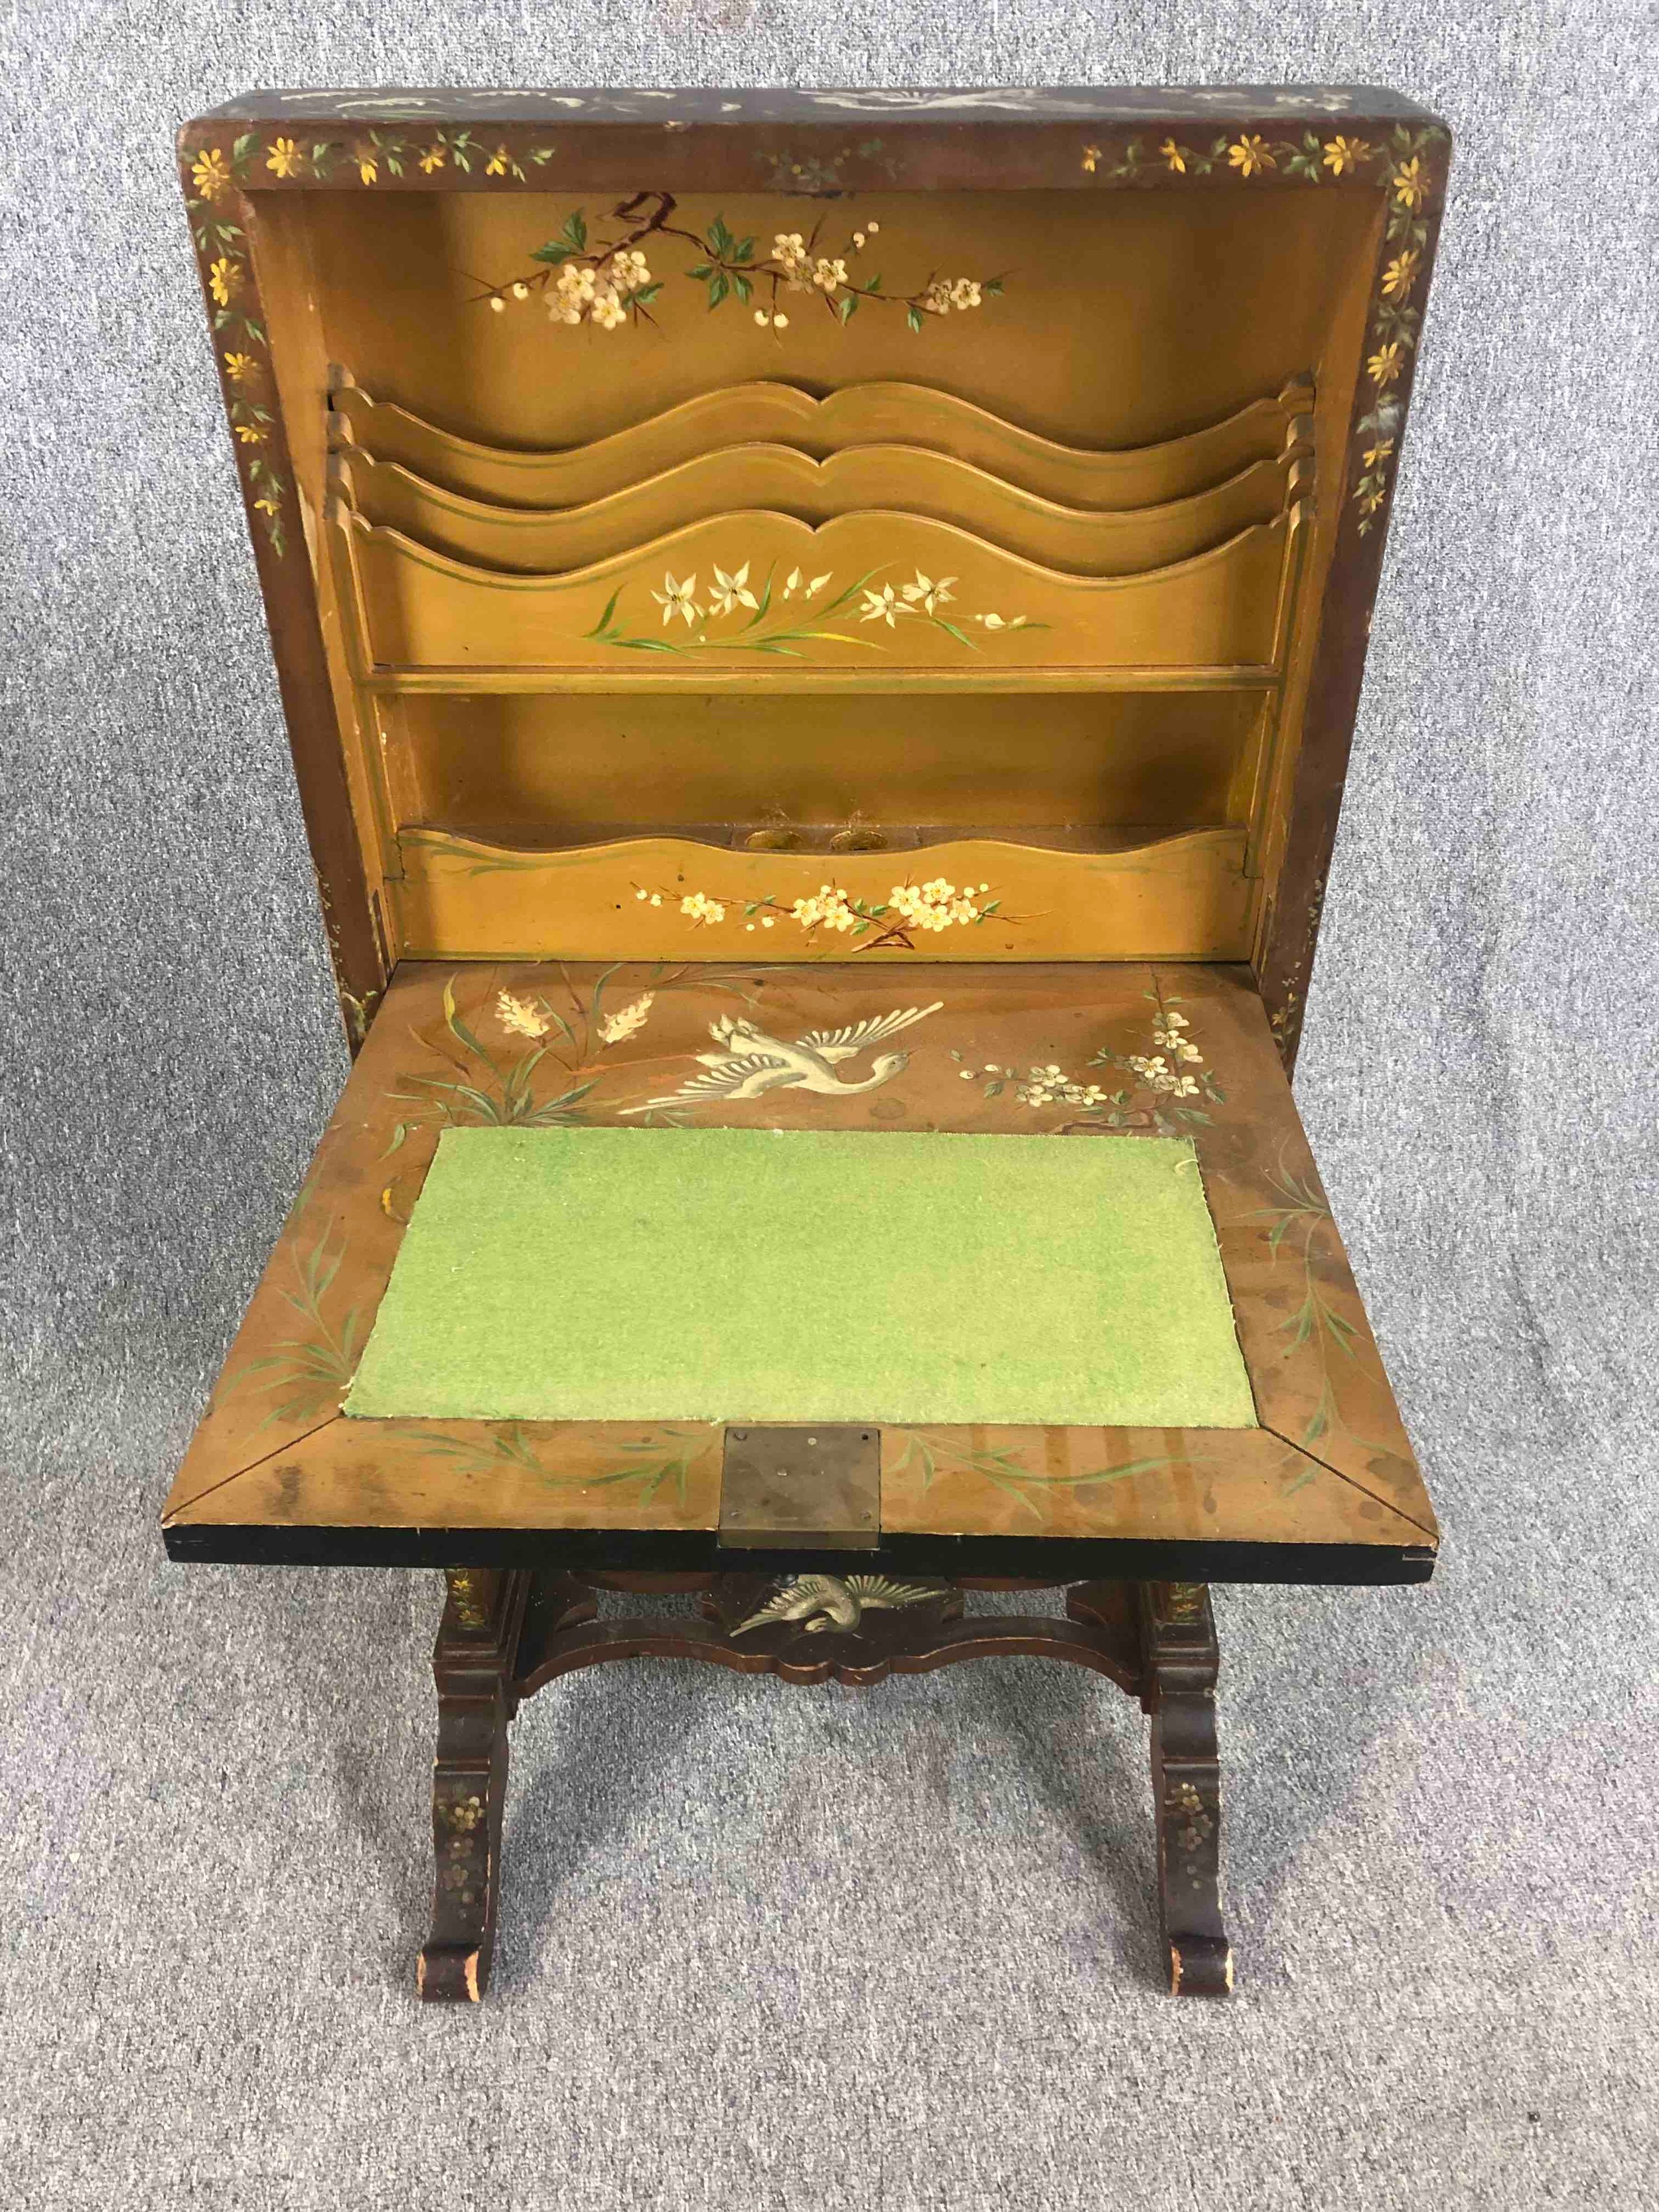 A late 19th century Chinoiserie decorated and lacquered secretaire screen with fall front - Image 5 of 9